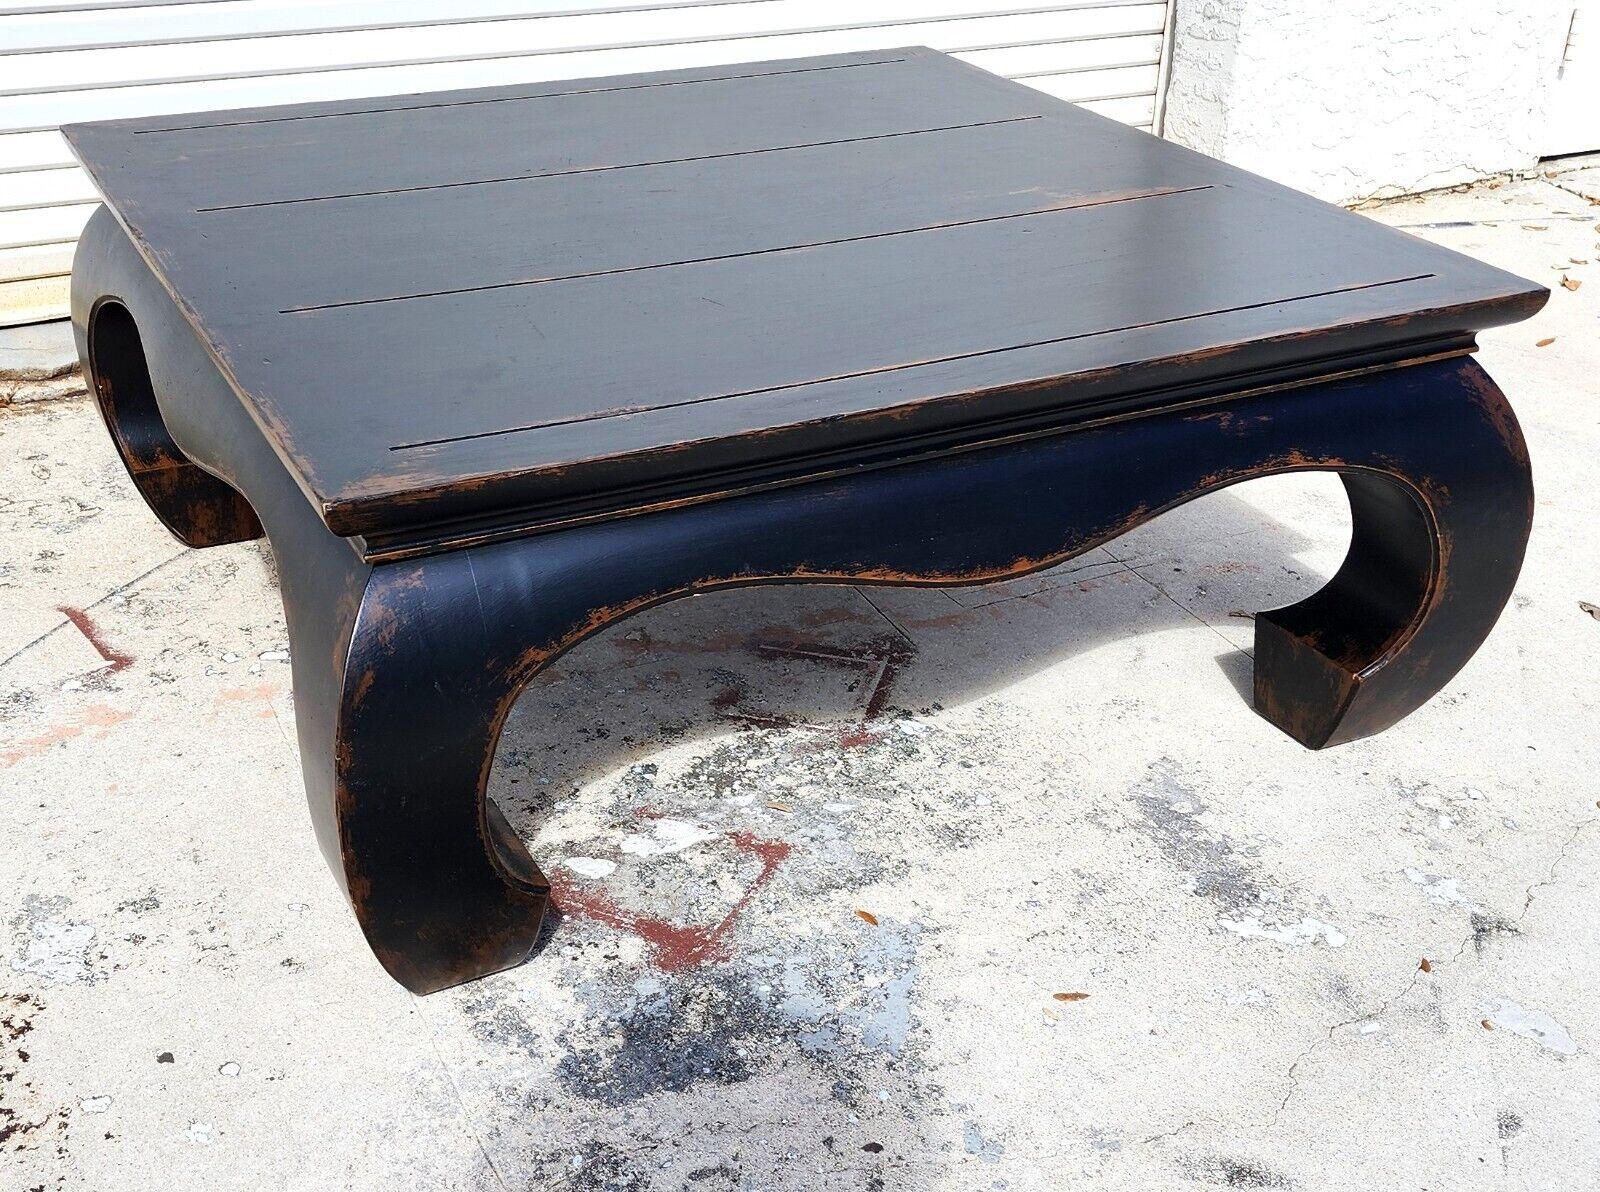 For FULL item description click on CONTINUE READING below.

Offering One Of Our Recent Palm Beach Estate Fine Furniture Acquisitions Of A
Vintage Ming Opium Solid Wood Distressed Finish Cocktail Coffee Table
Very solid, heavy, and well-built